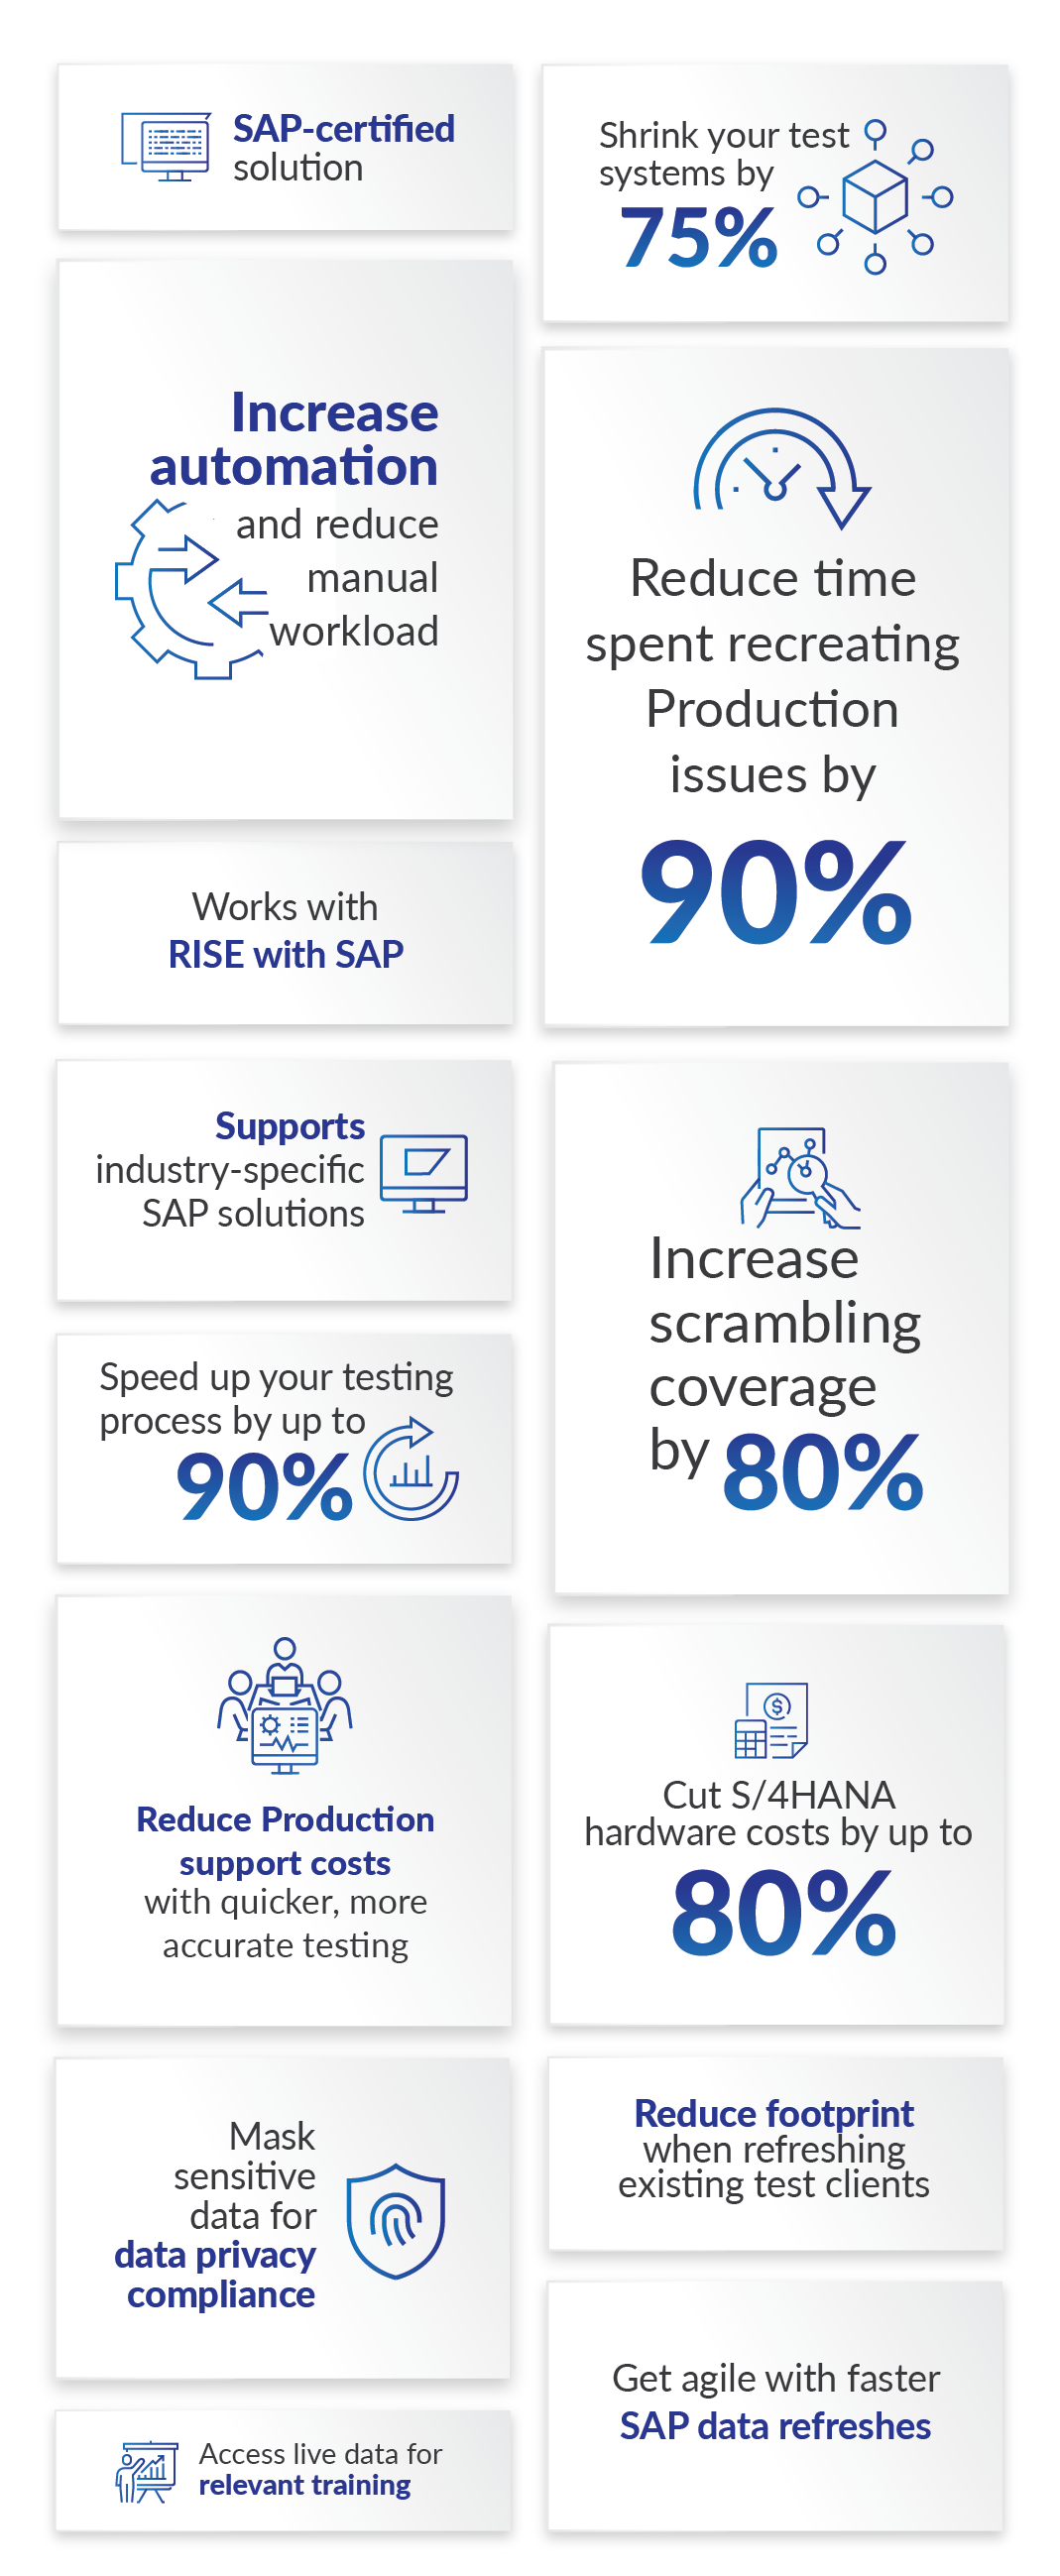 Data Sync Manager (DSM) is an automated SAP-certified solution which Works with RISE with SAP. Cut S/4HANA hardware costs by up to 80%. Shrink your test systems by 75%. Increase scrambling coverage by 80%. Speed up your testing process by up to 90%.